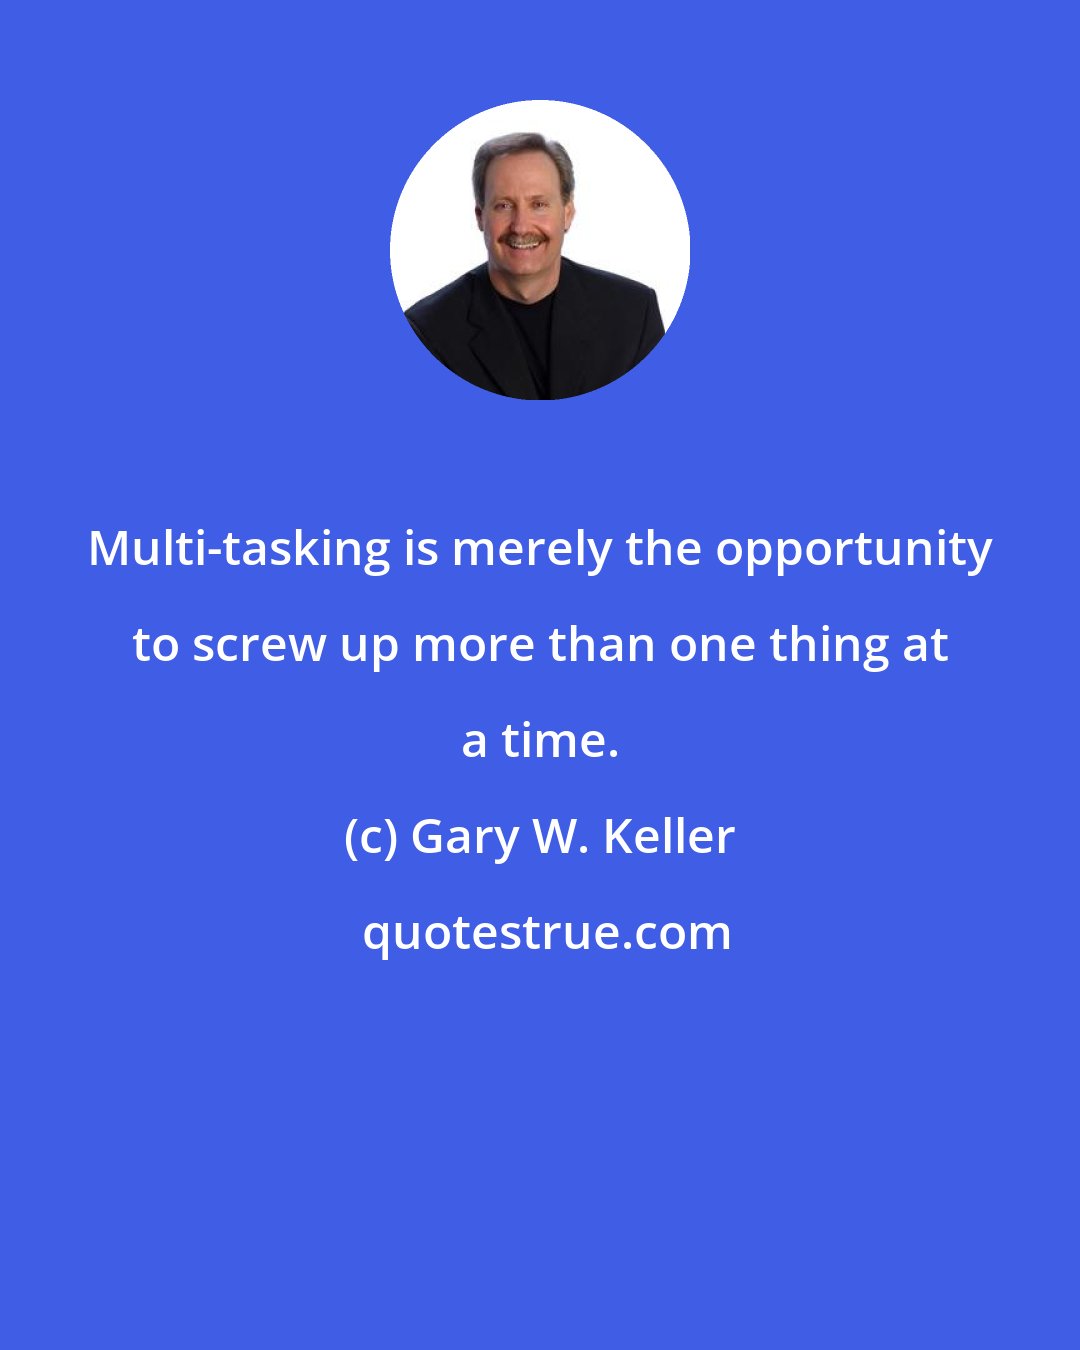 Gary W. Keller: Multi-tasking is merely the opportunity to screw up more than one thing at a time.